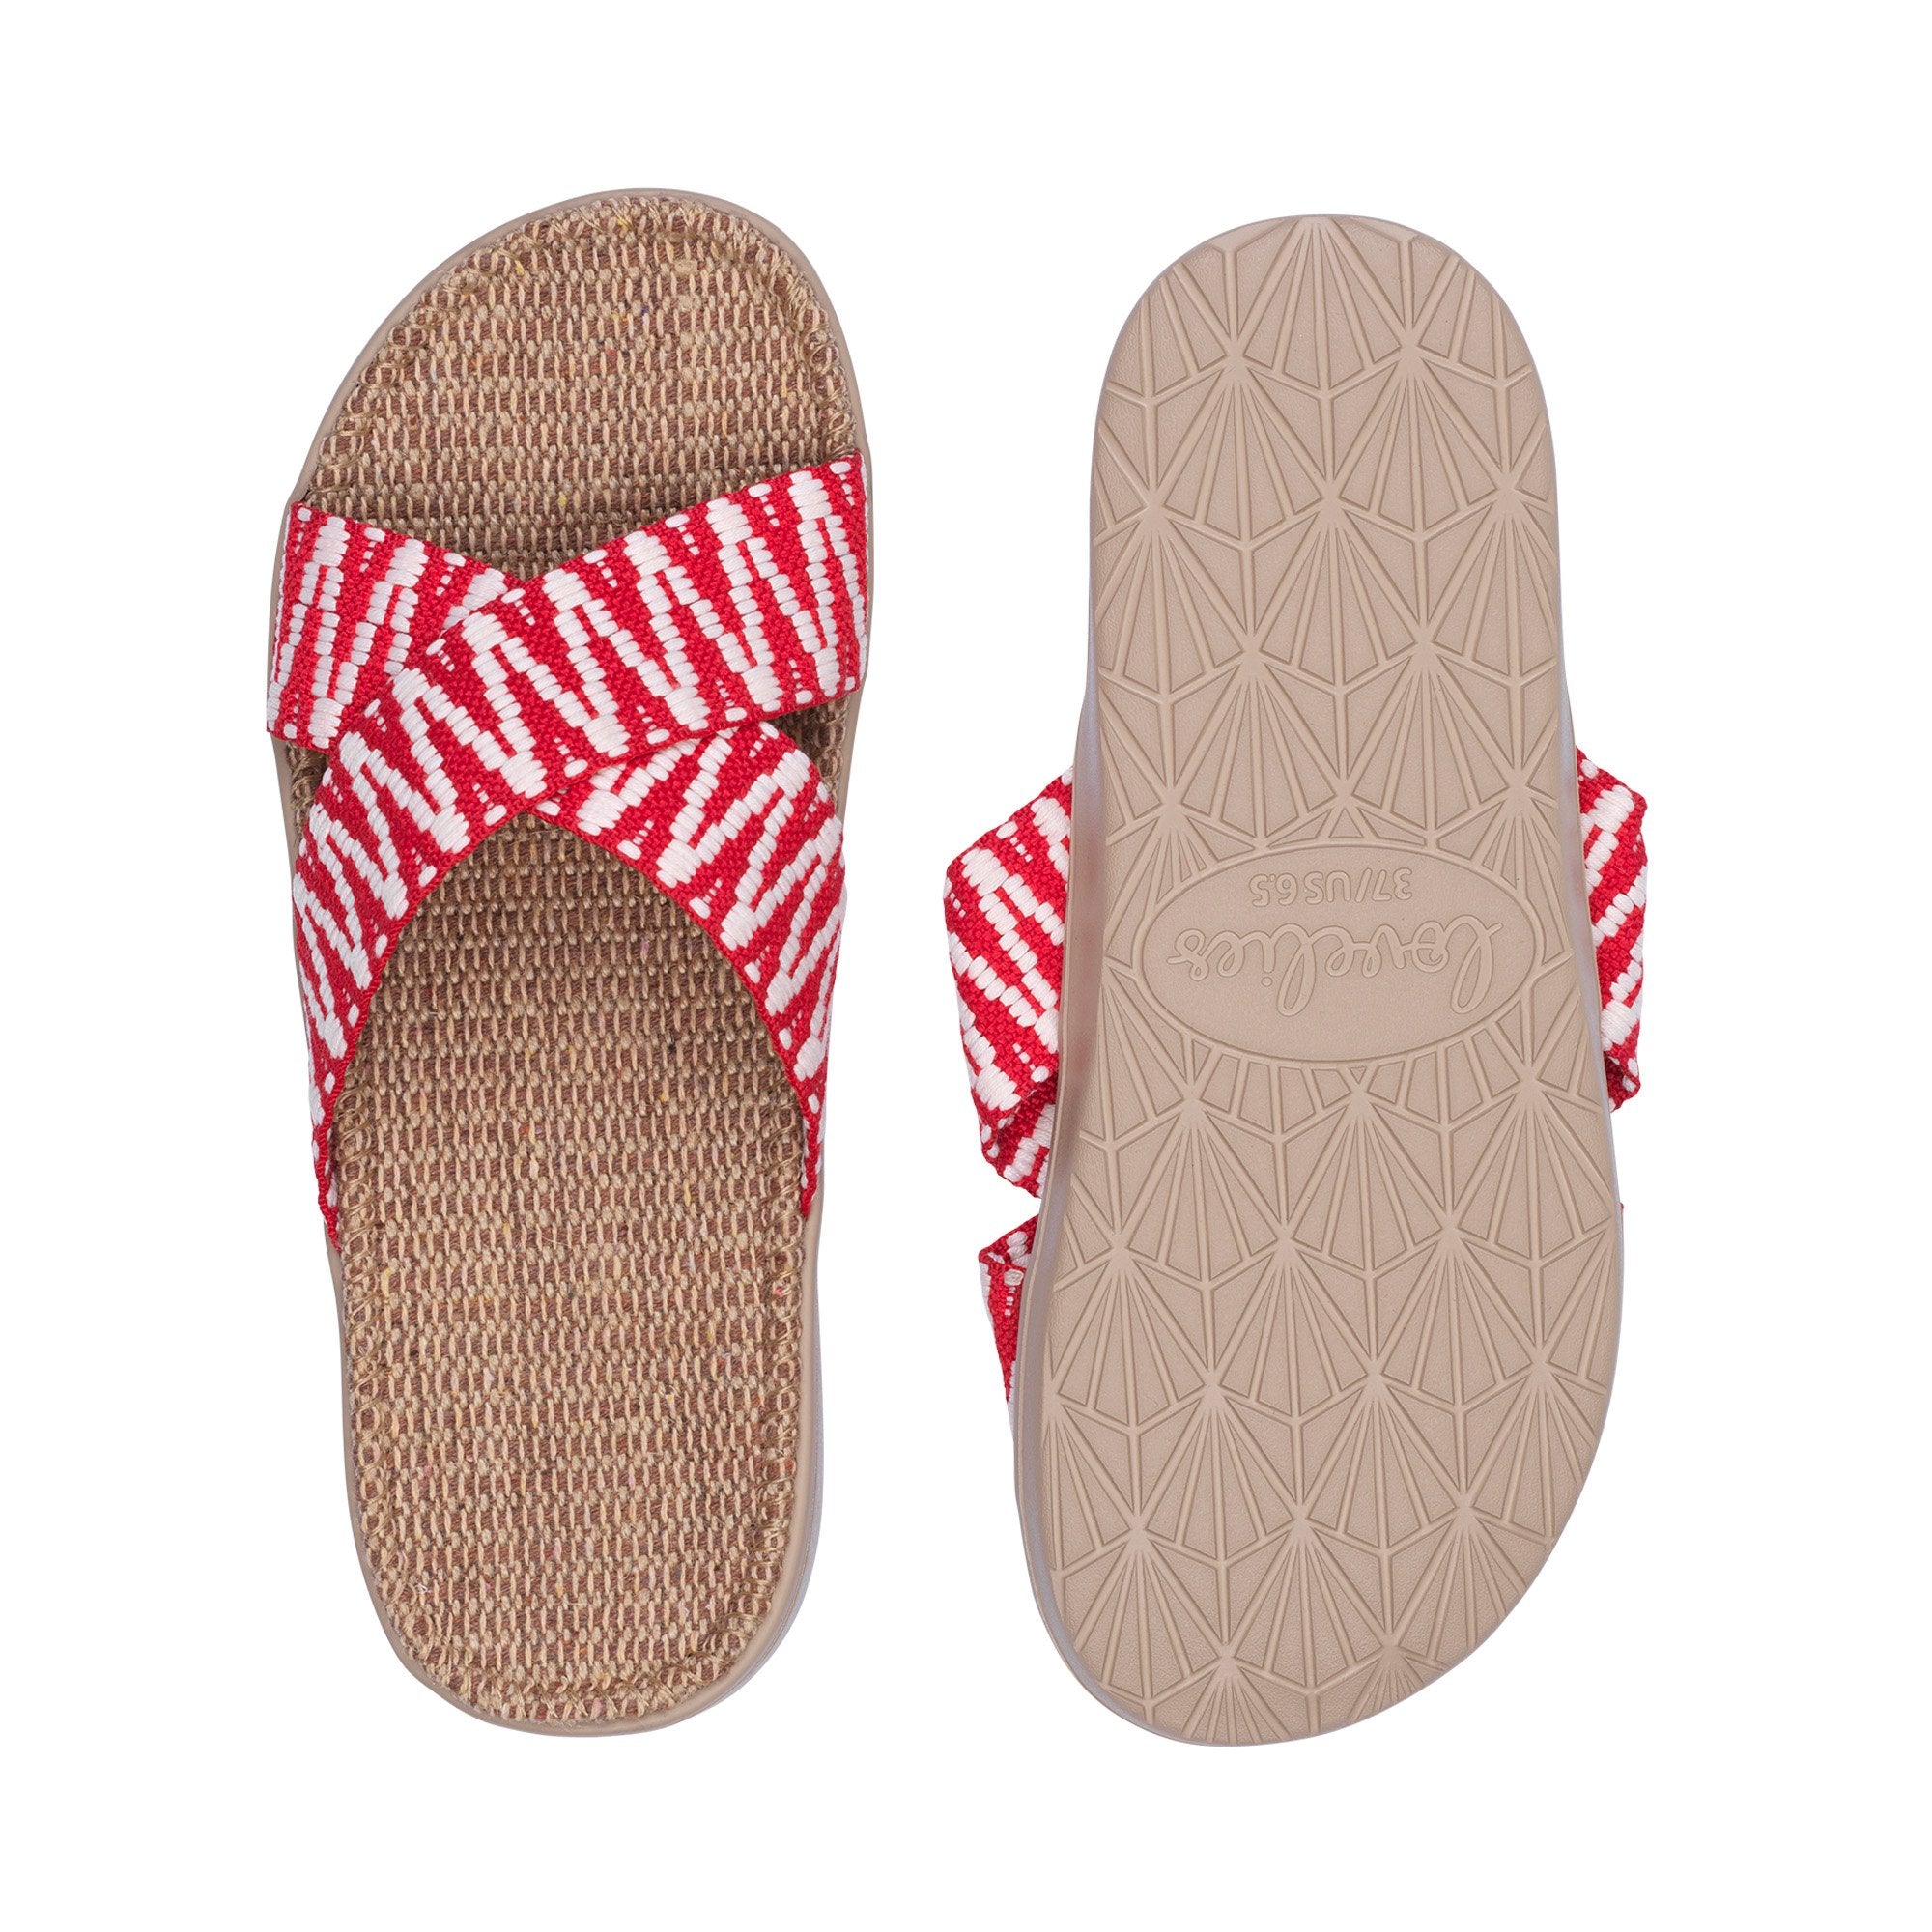 Sandal with woven straps. The soft inner sole is covered with jute.